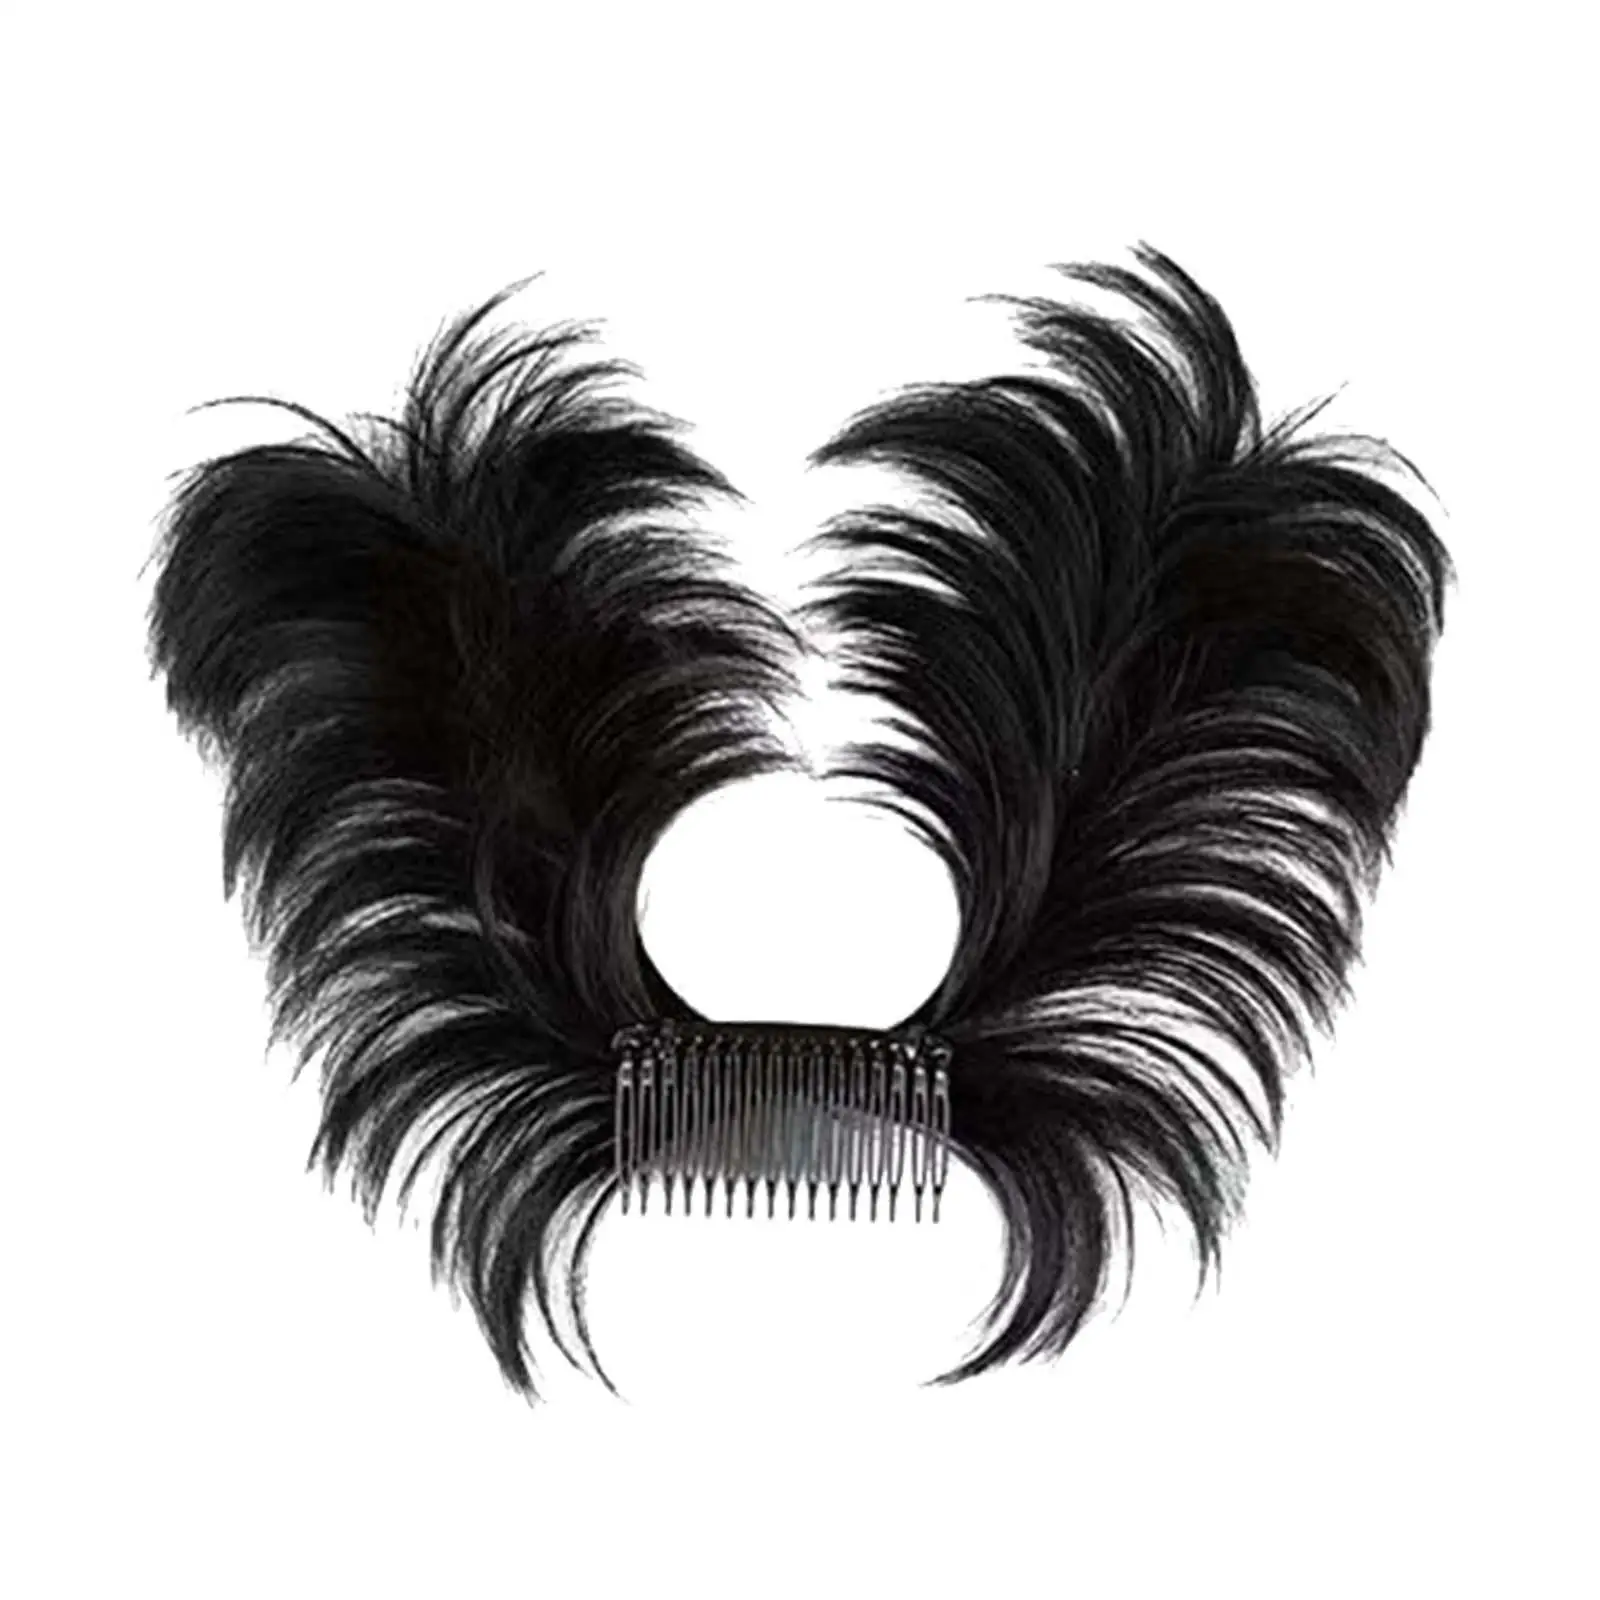 Side Comb Hair Messy Buns Hair Bun Extension Women Messy Bun Hairpieces for All Hair Types Styling Long Hair Thick Hairs Party